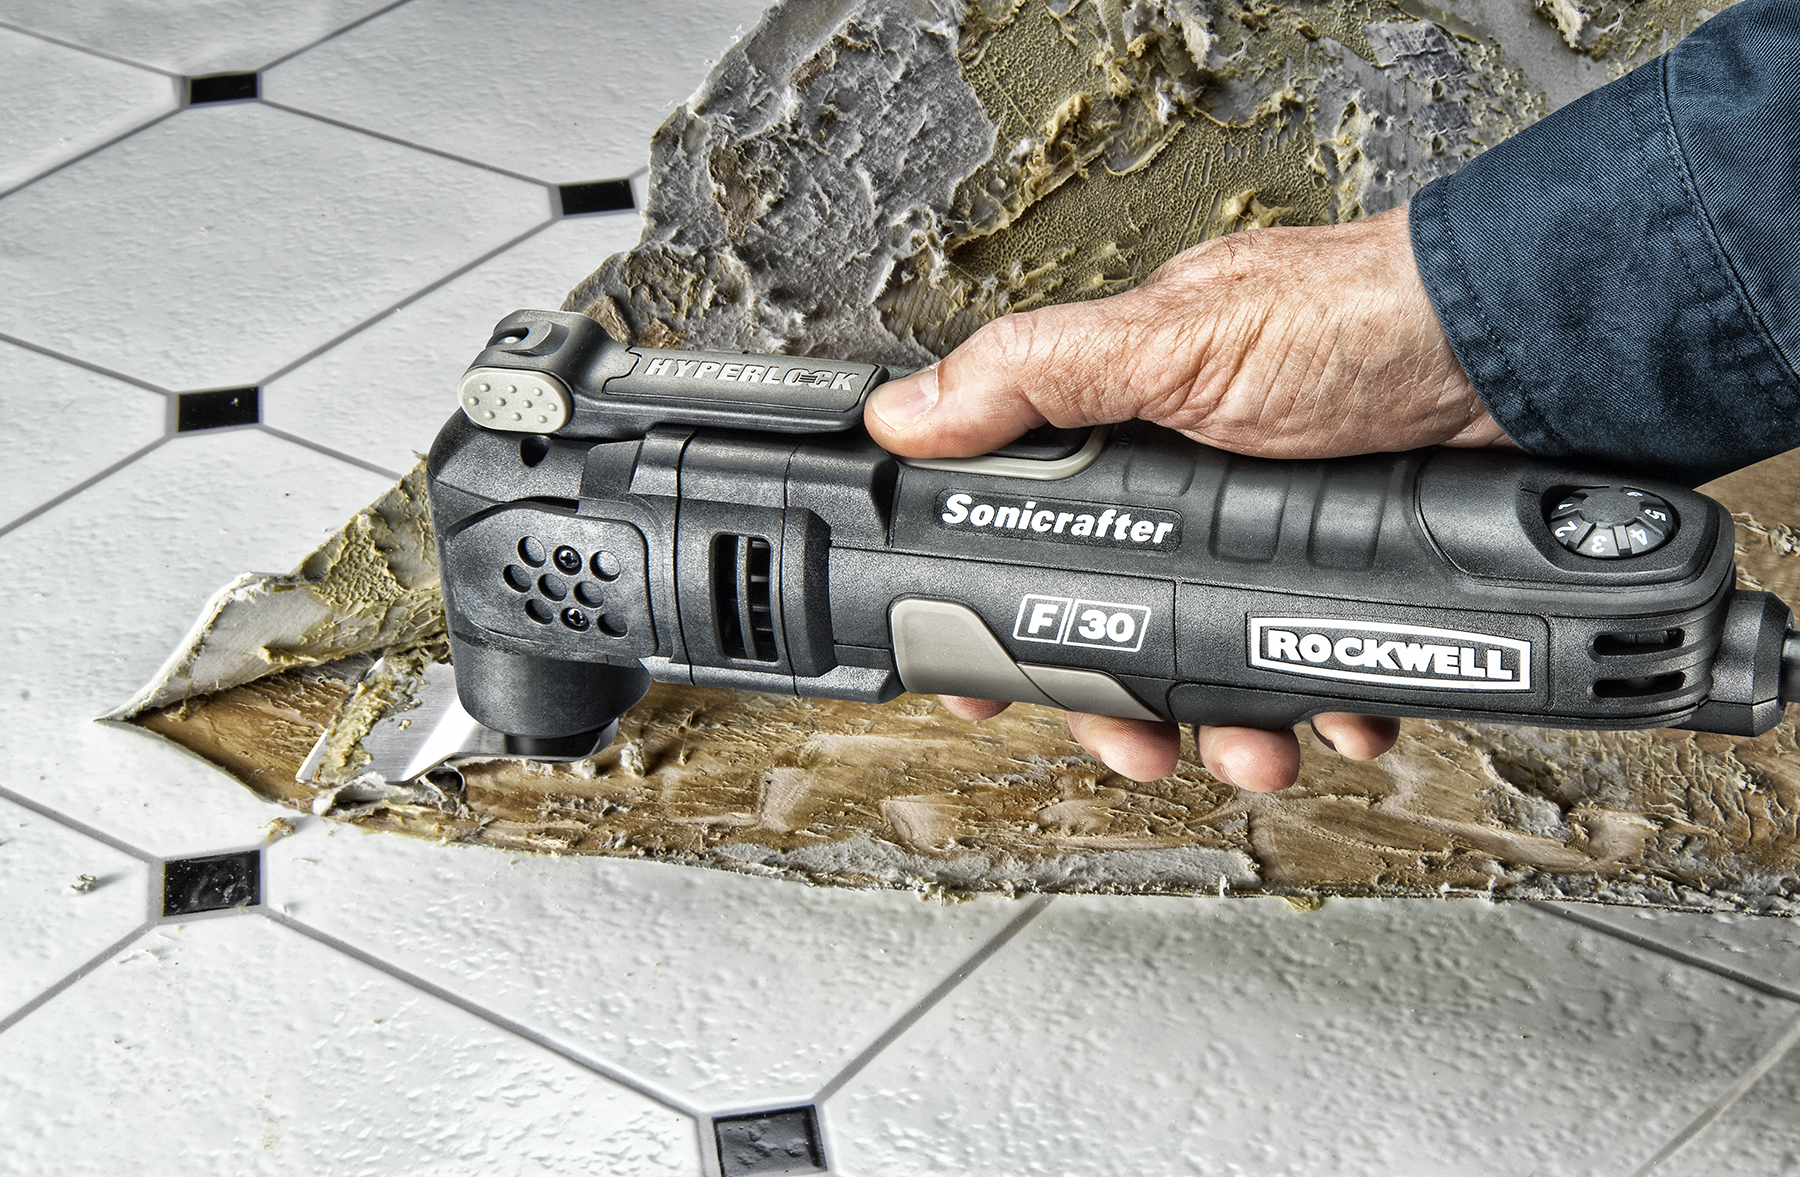 Rockwell Sonicrafter F30 is ideal for removing tile adhesive